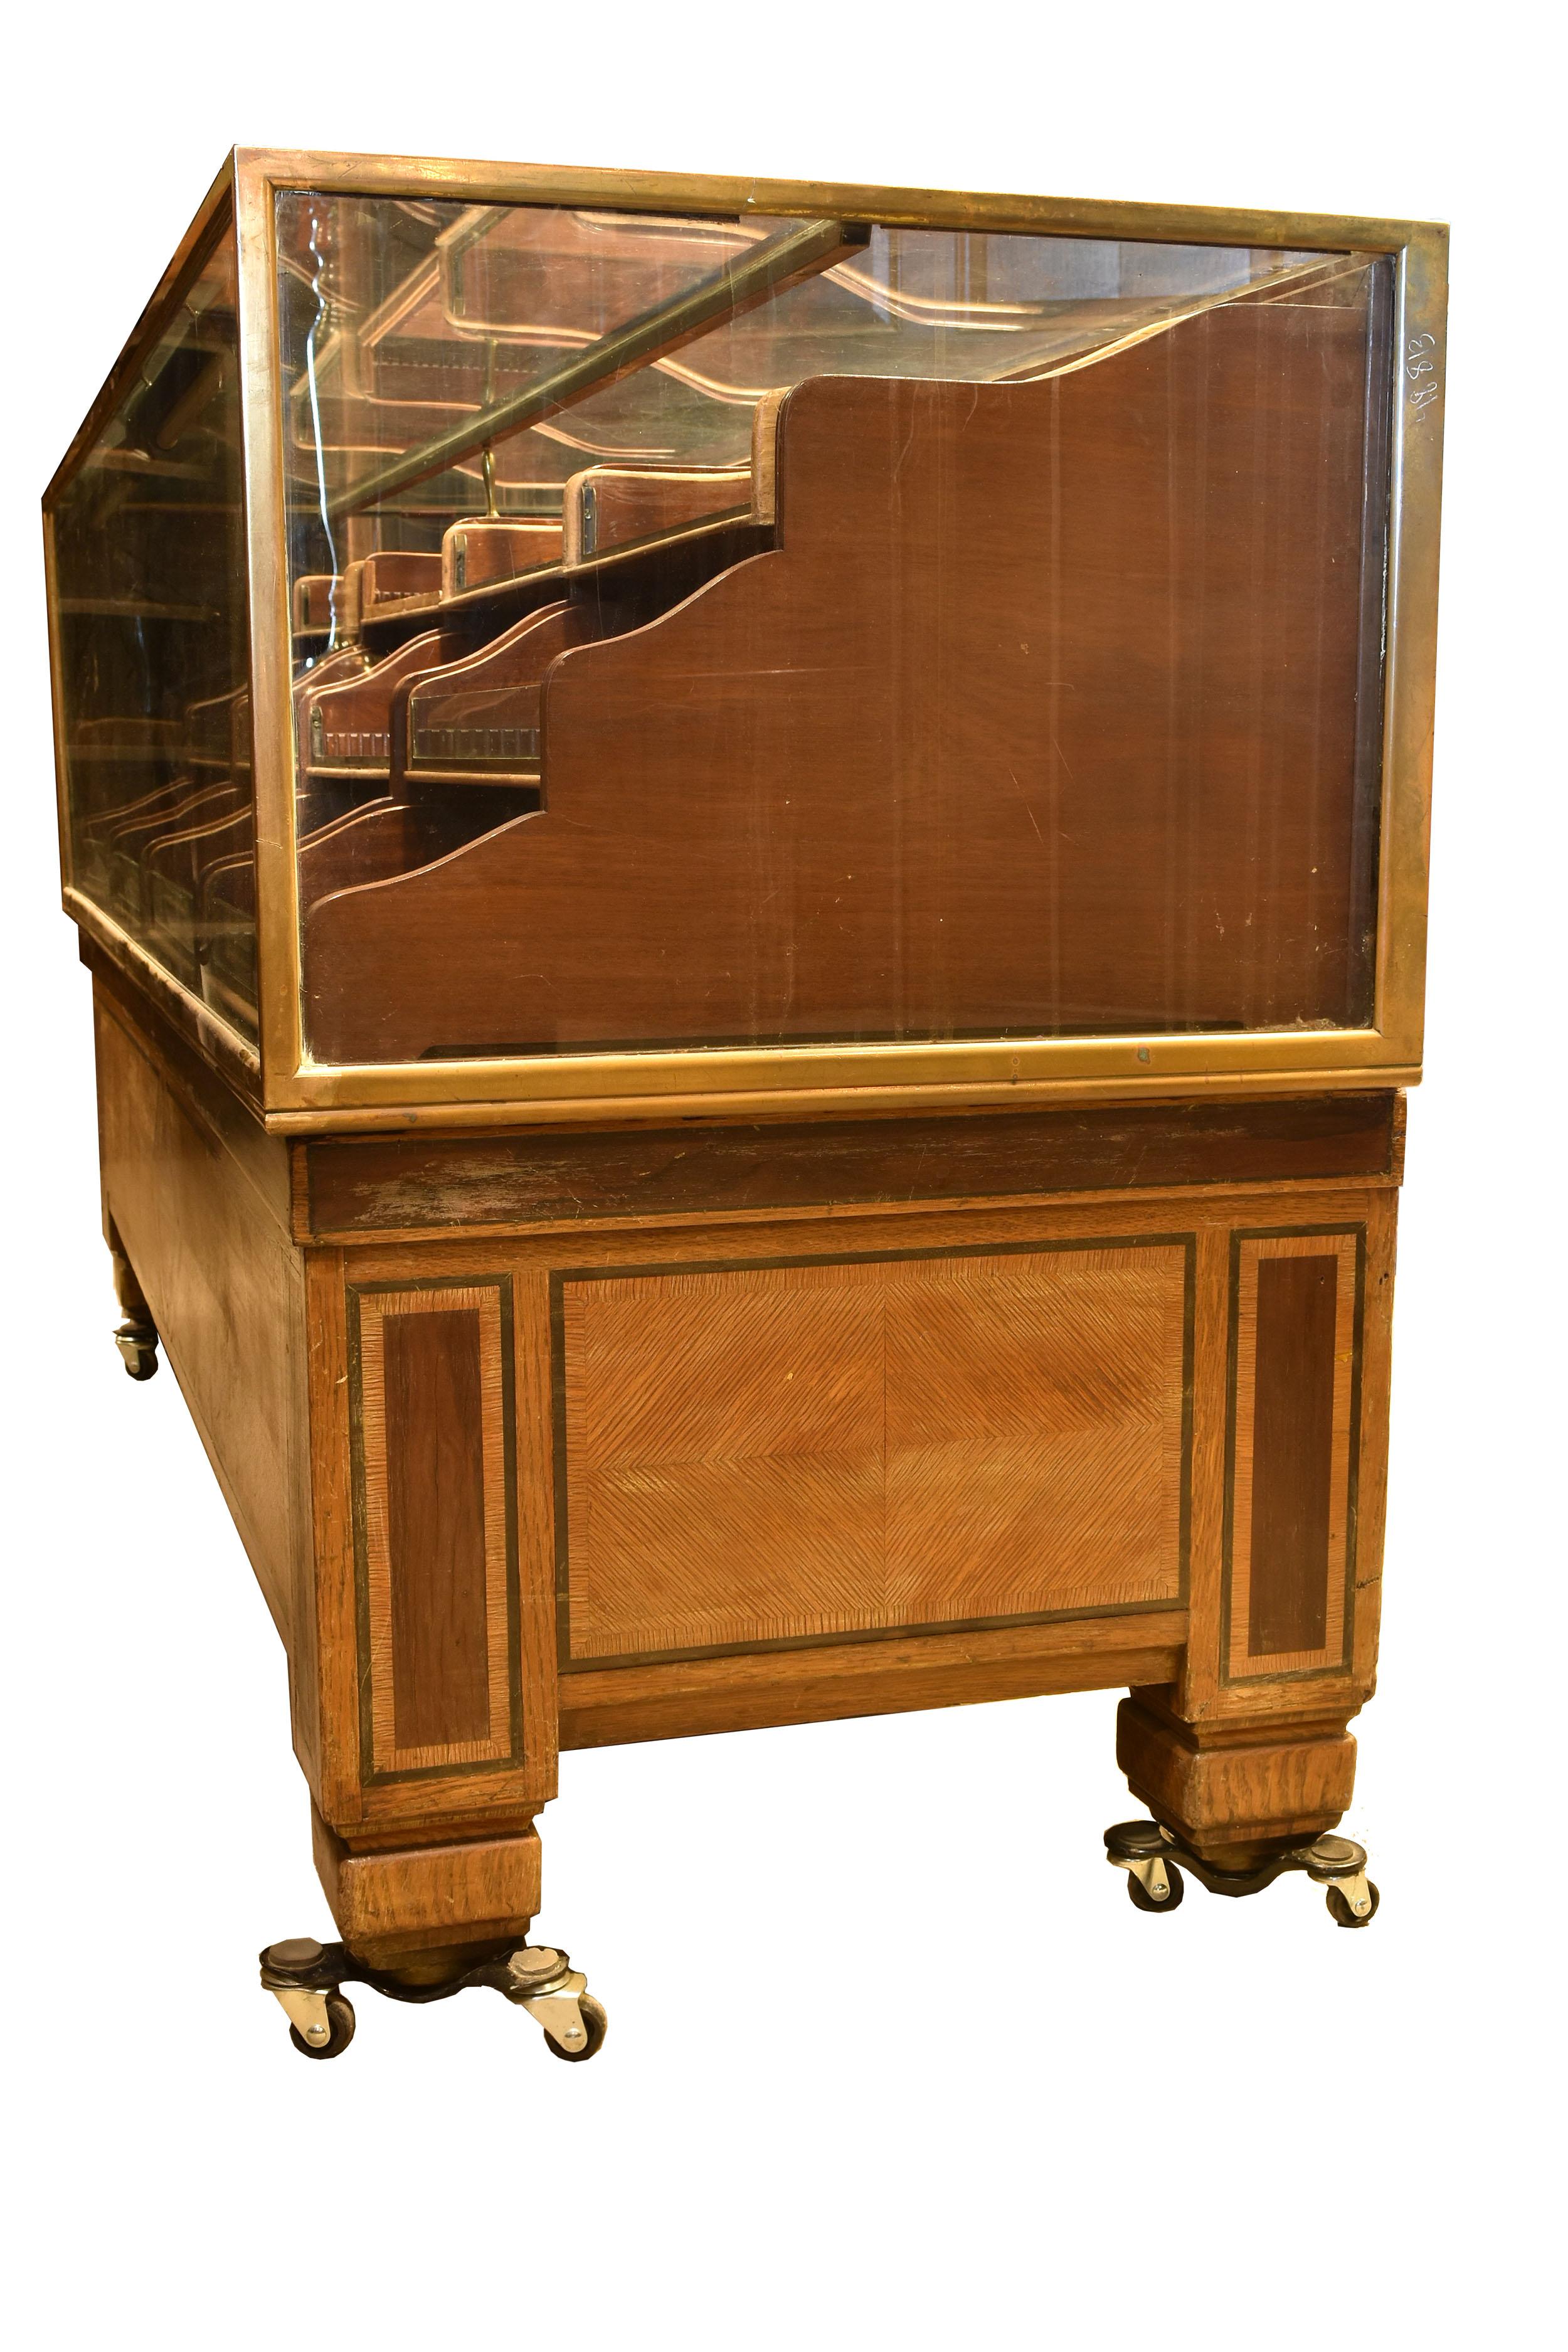 Art Deco inlaid mercantile display case with shelves

AA# 48814

circa 1920s
Condition: Good
Material: Golden oak with walnut
Finish: Original
Country of origin: USA

This Classic deco crafted golden oak display cabinet features a walnut